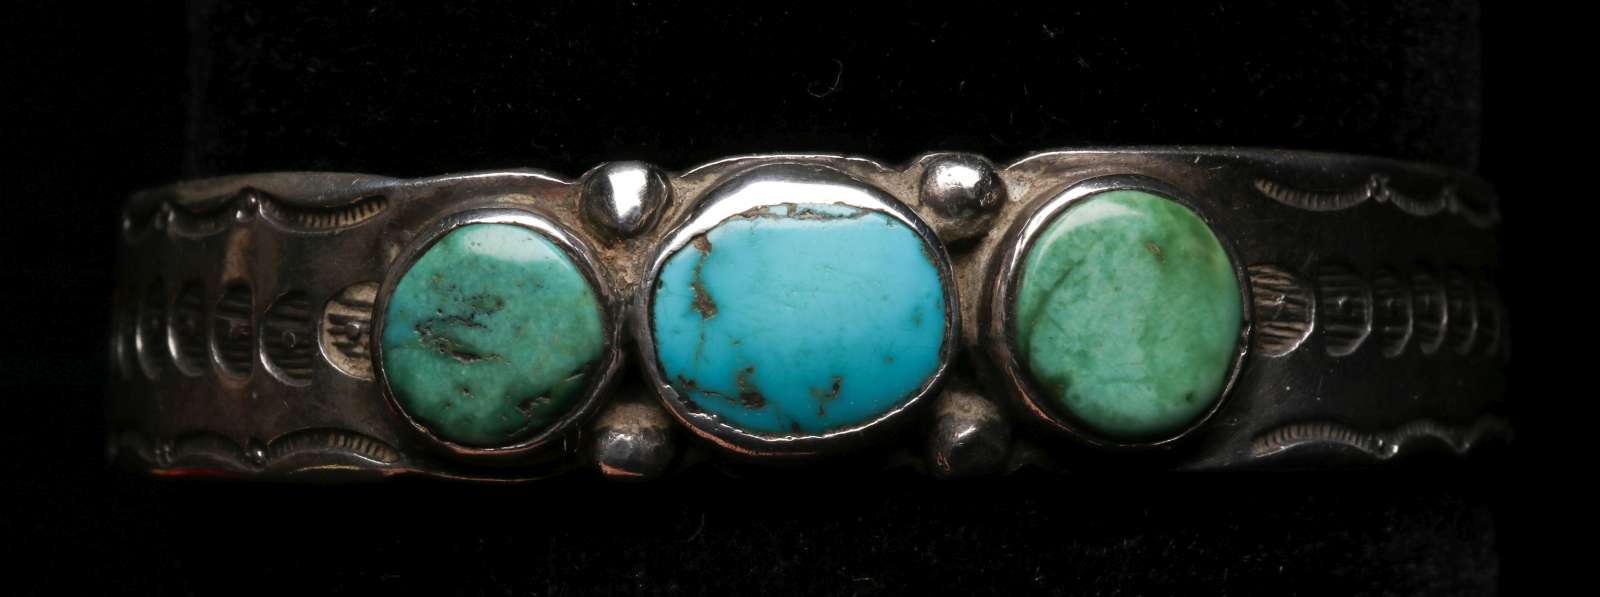 A GOOD OLDER NAVAJO STERLING CUFF WITH TURQUOISE